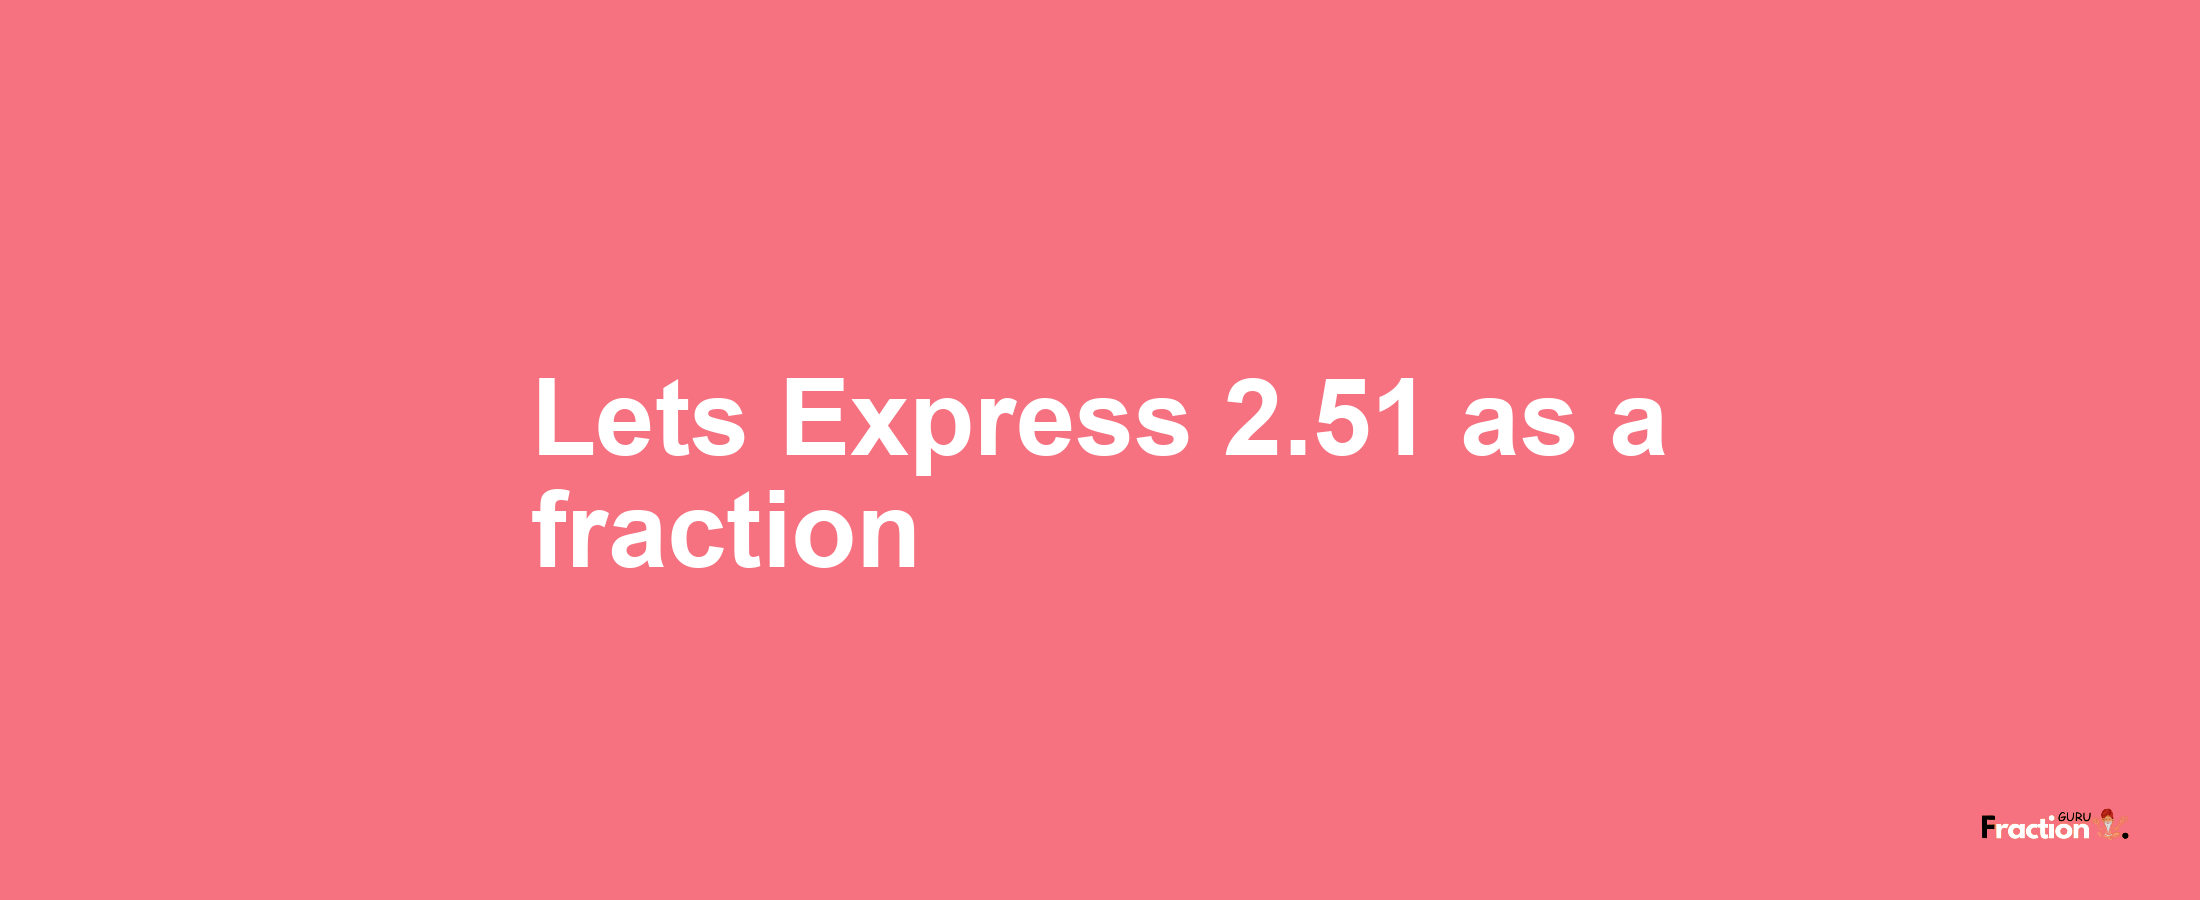 Lets Express 2.51 as afraction